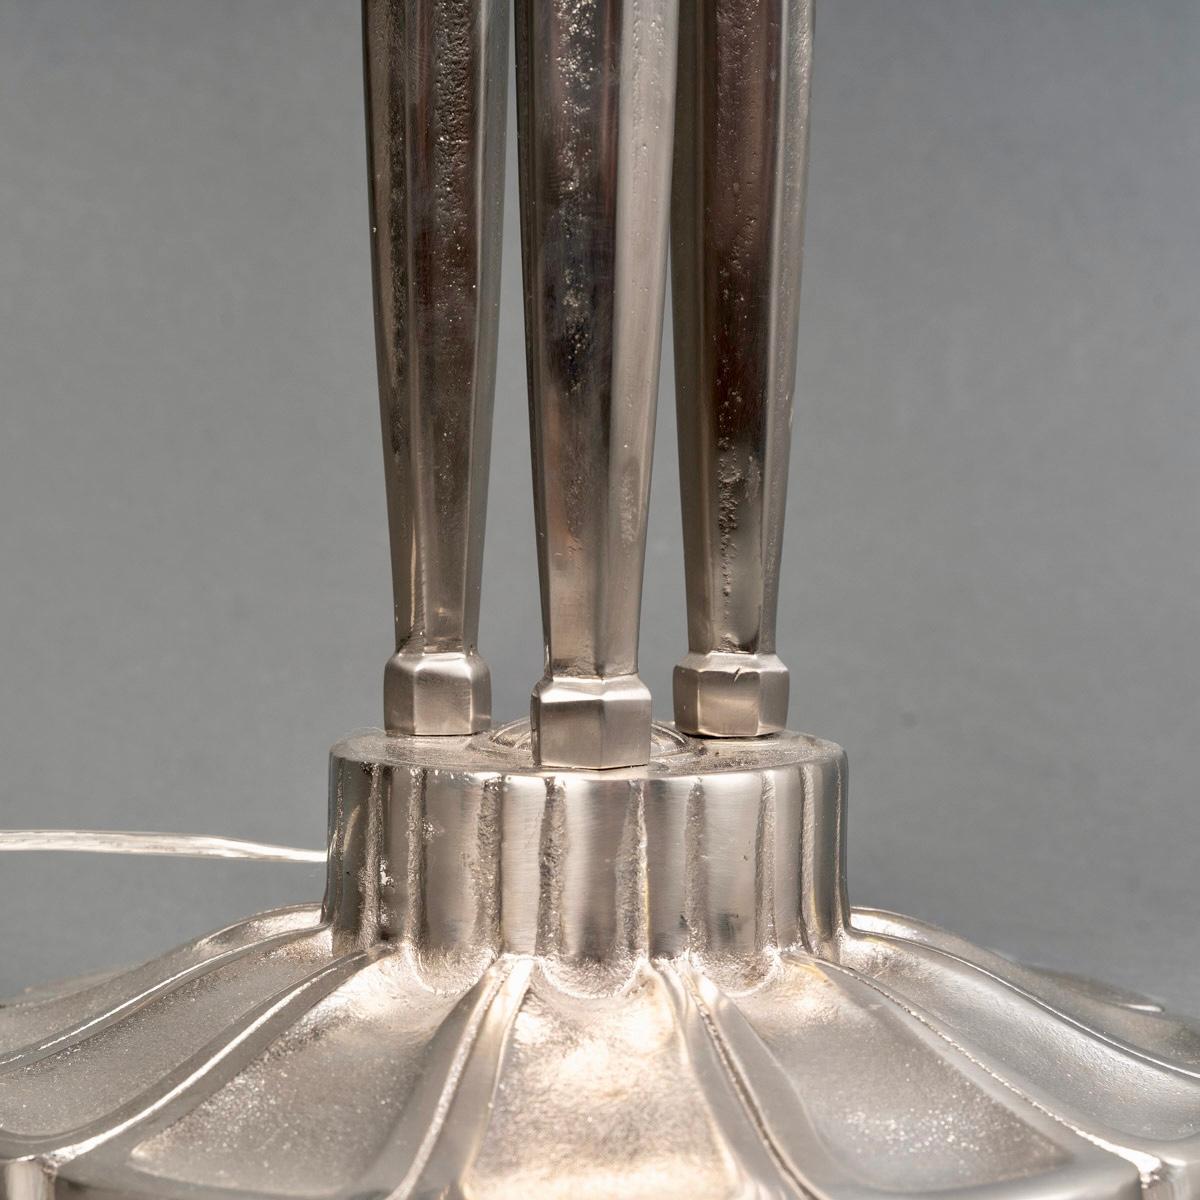 1927 René Lalique - Pair Of Lamps Lierre Ivy Glass & Nickeled Bronze  For Sale 1